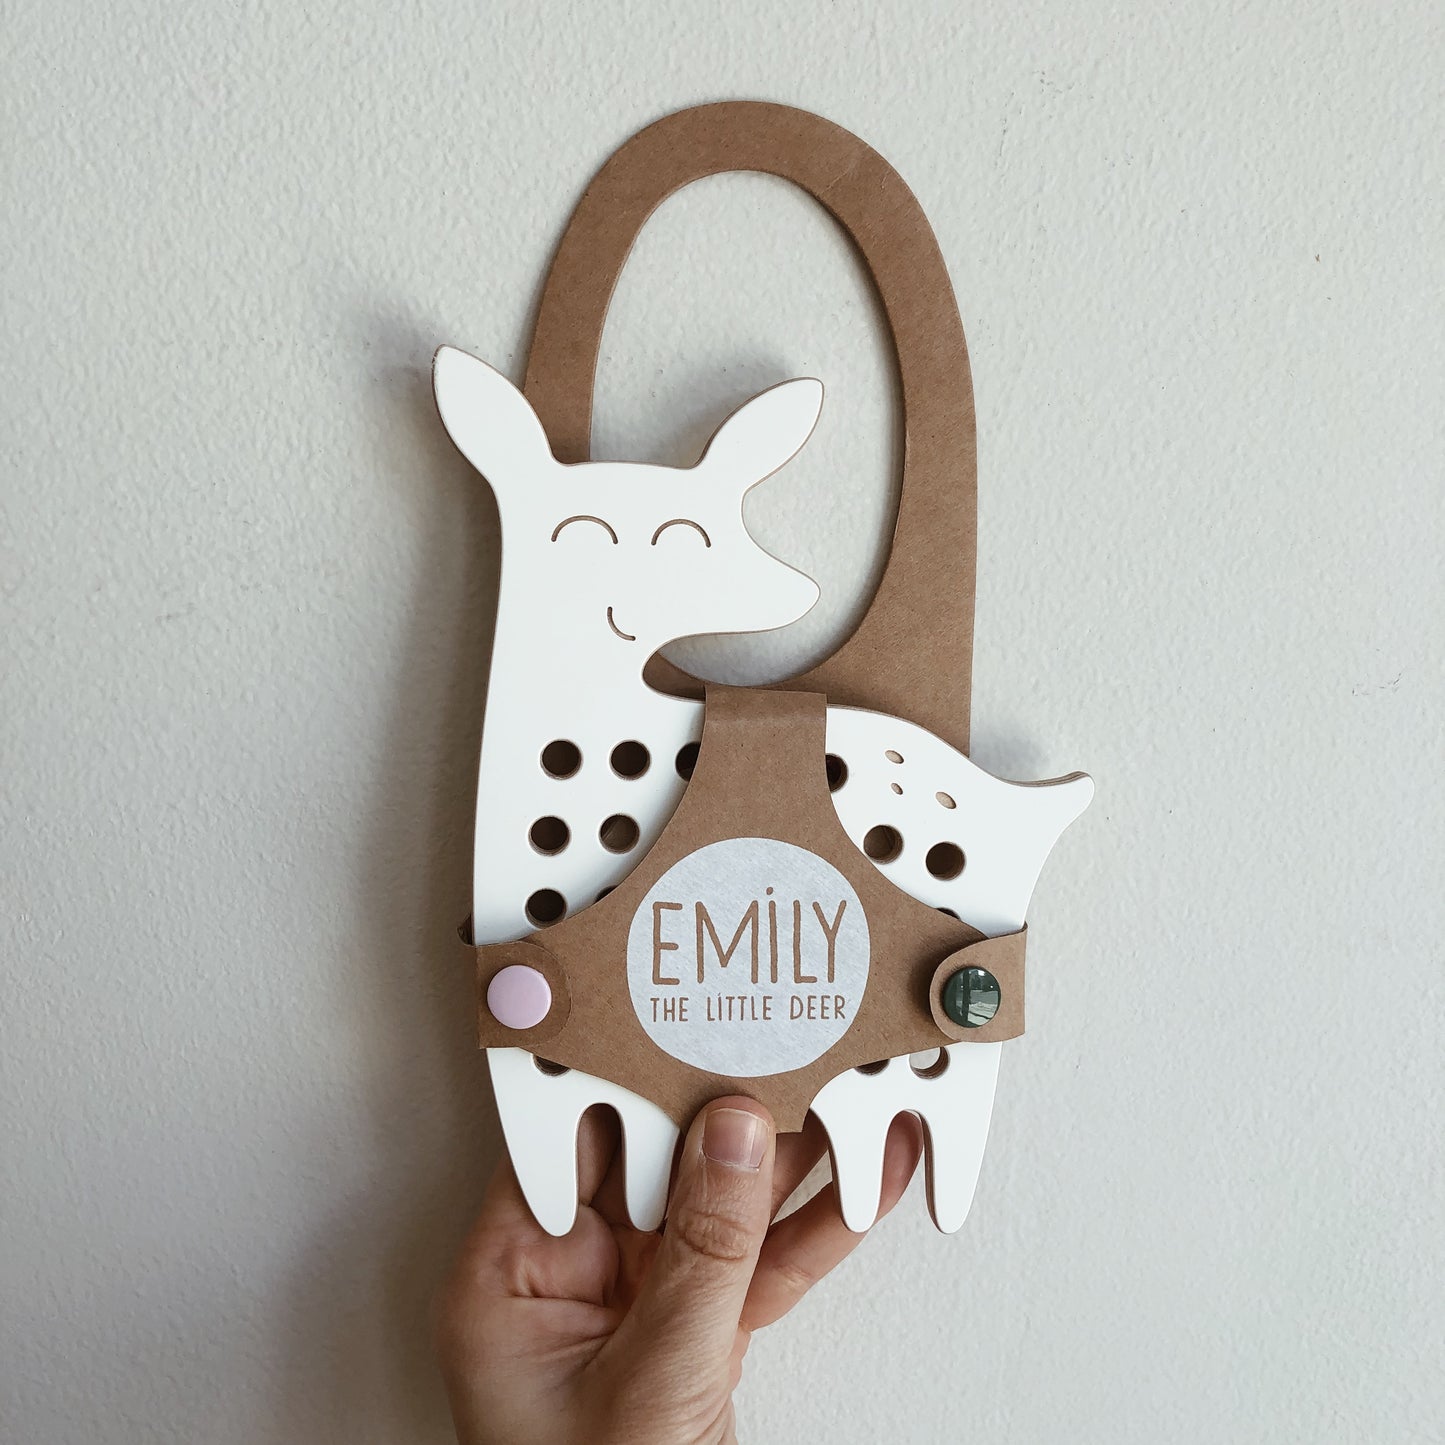 Emily the Deer Lacing Toy